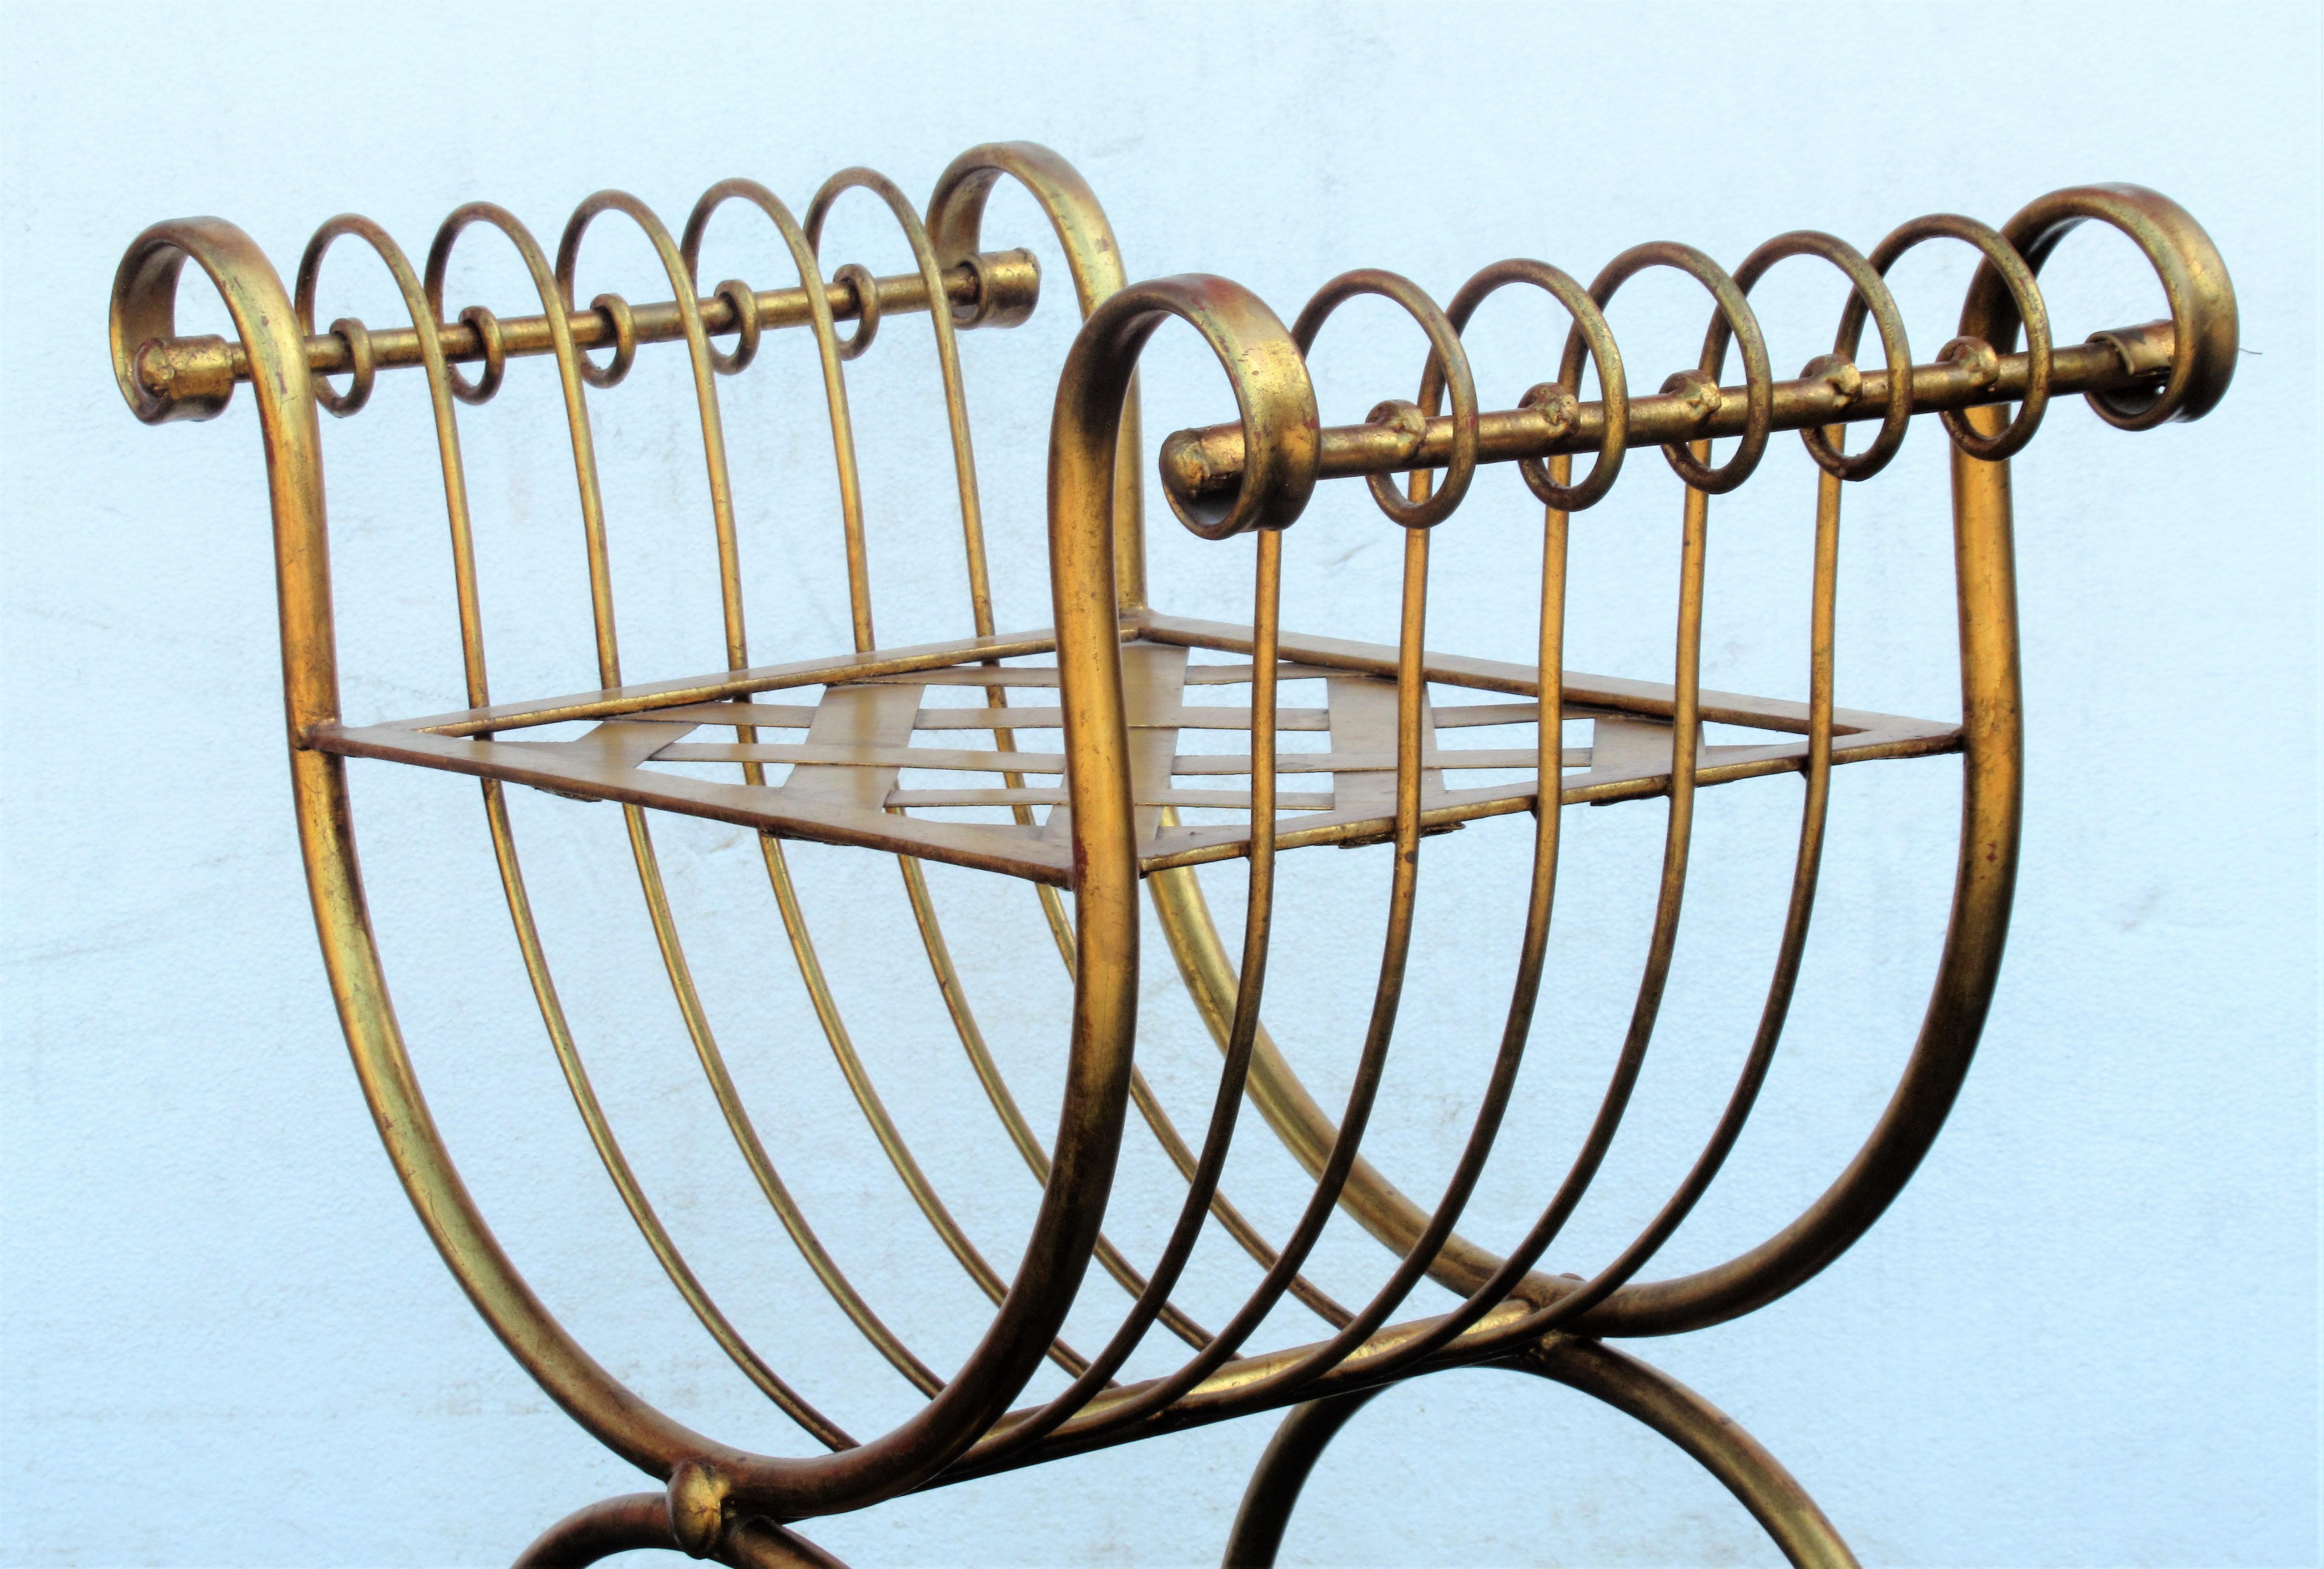 Italian gilt iron curule bench in overall beautifully aged original gilded surface with small areas of underlying red bole highlights showing, circa 1960. Look at all pictures and read condition report in comment section.